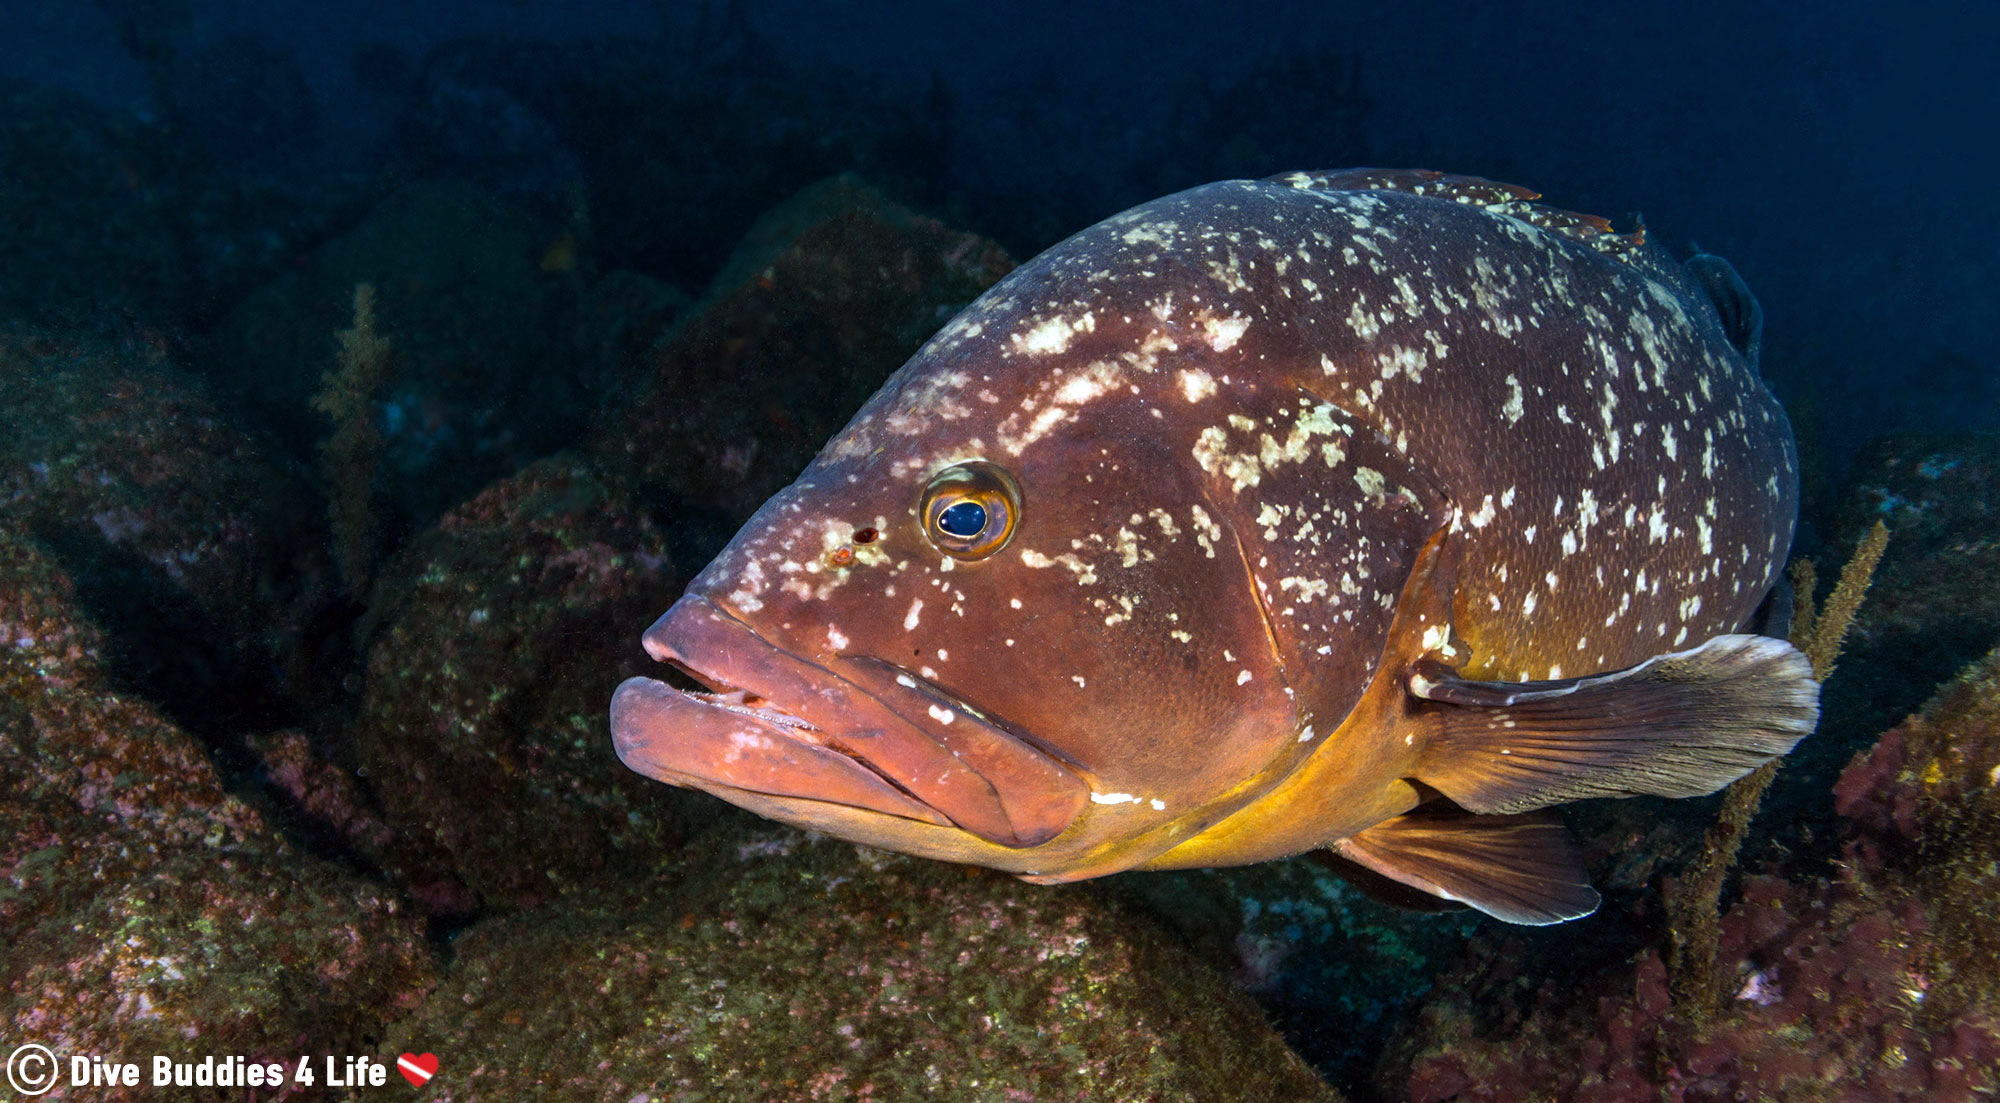 A Big Dusky Grouper Coming Close To The Underwater Camera On A Deep Dive On Saõ Miguel In The Portuguese Azores Islands